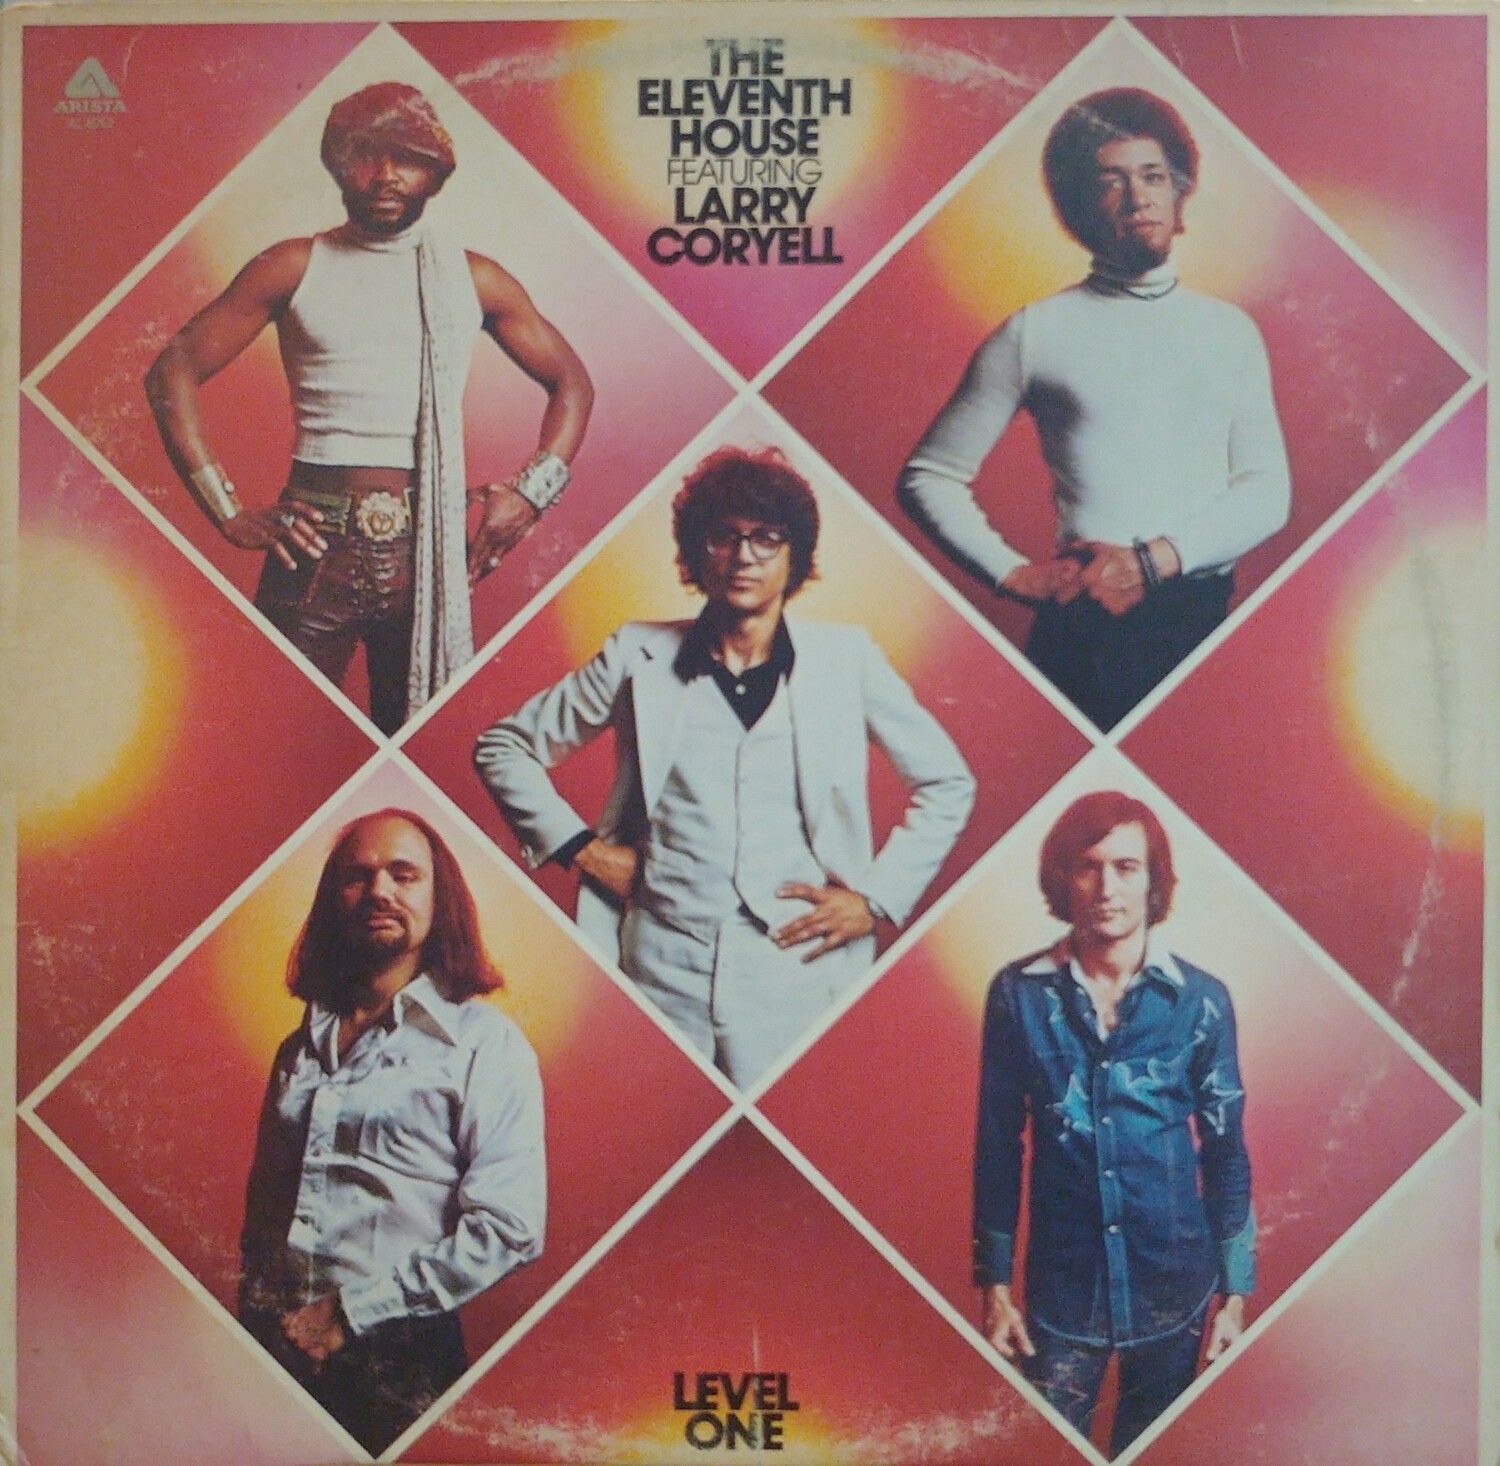 The Eleventh House ft Larry Coryell - Level One